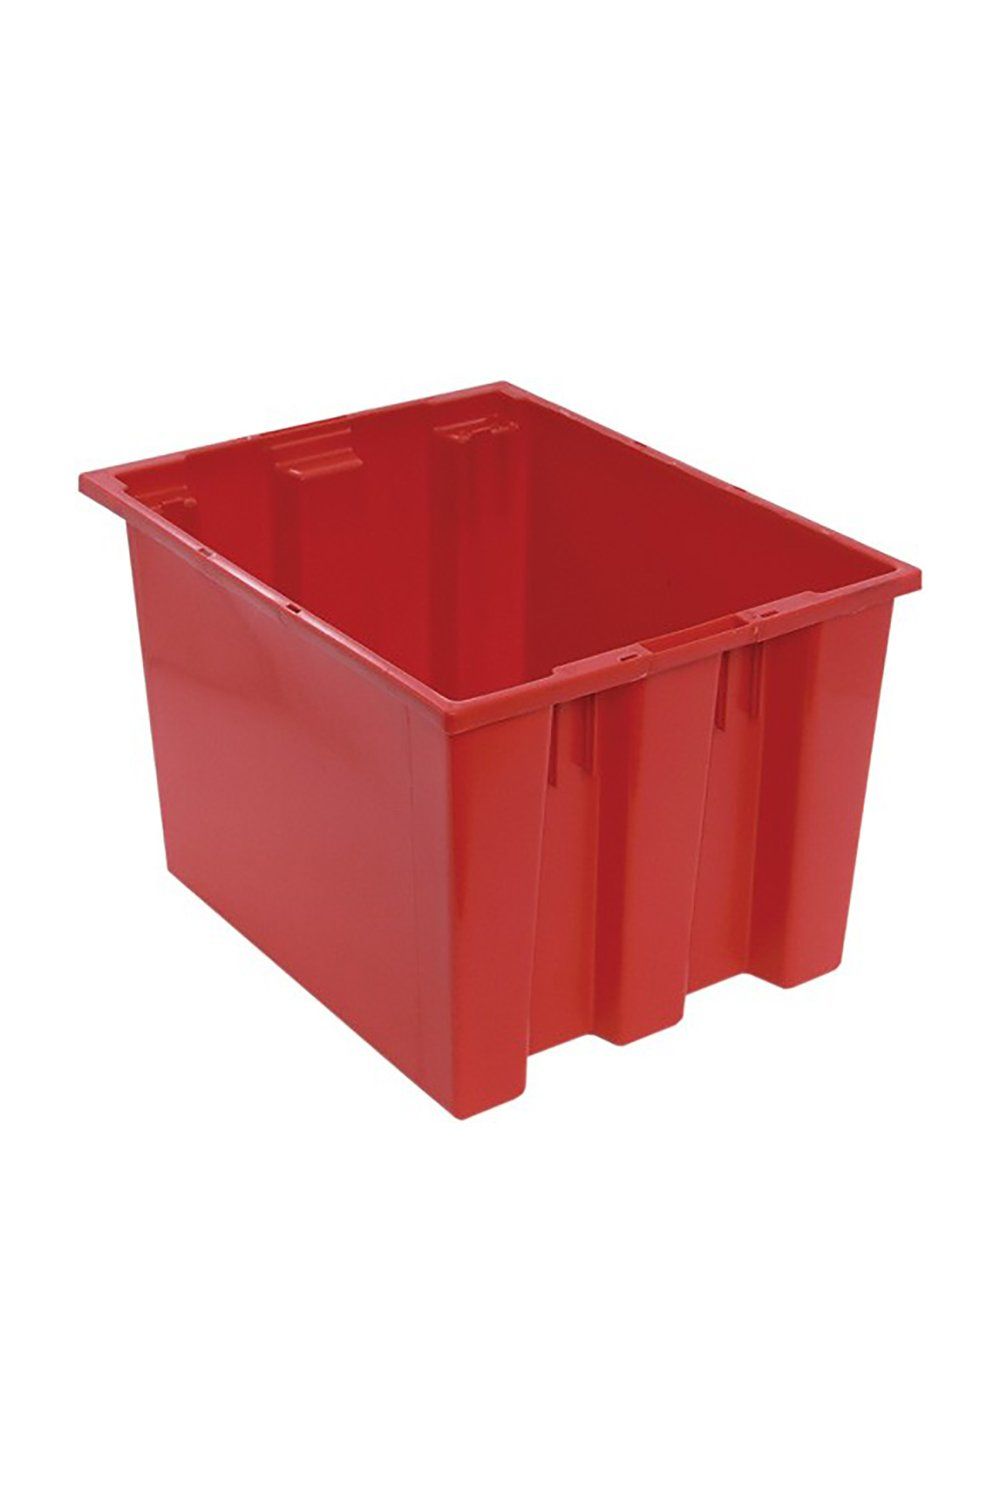 Stack and Nest Tote Bins & Containers Acart 19-1/2"L x 15-1/2"W x 13"H Red 